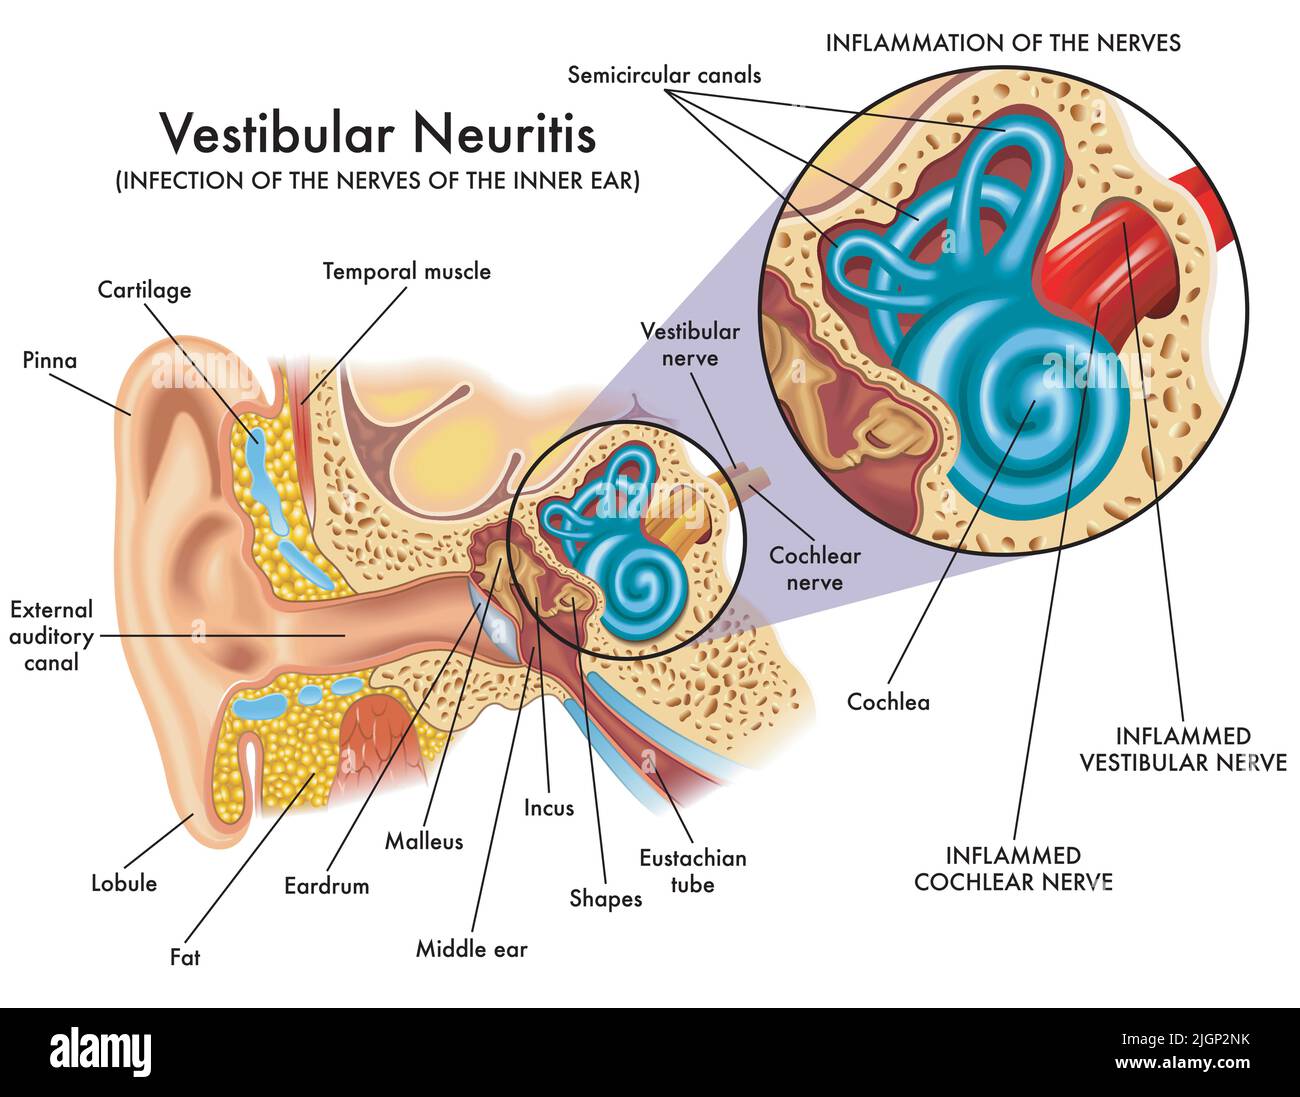 Medical illustration shows the infection and inflammation of the nerves of the inner ear, called vestibular neuritis, with annotations. Stock Vector